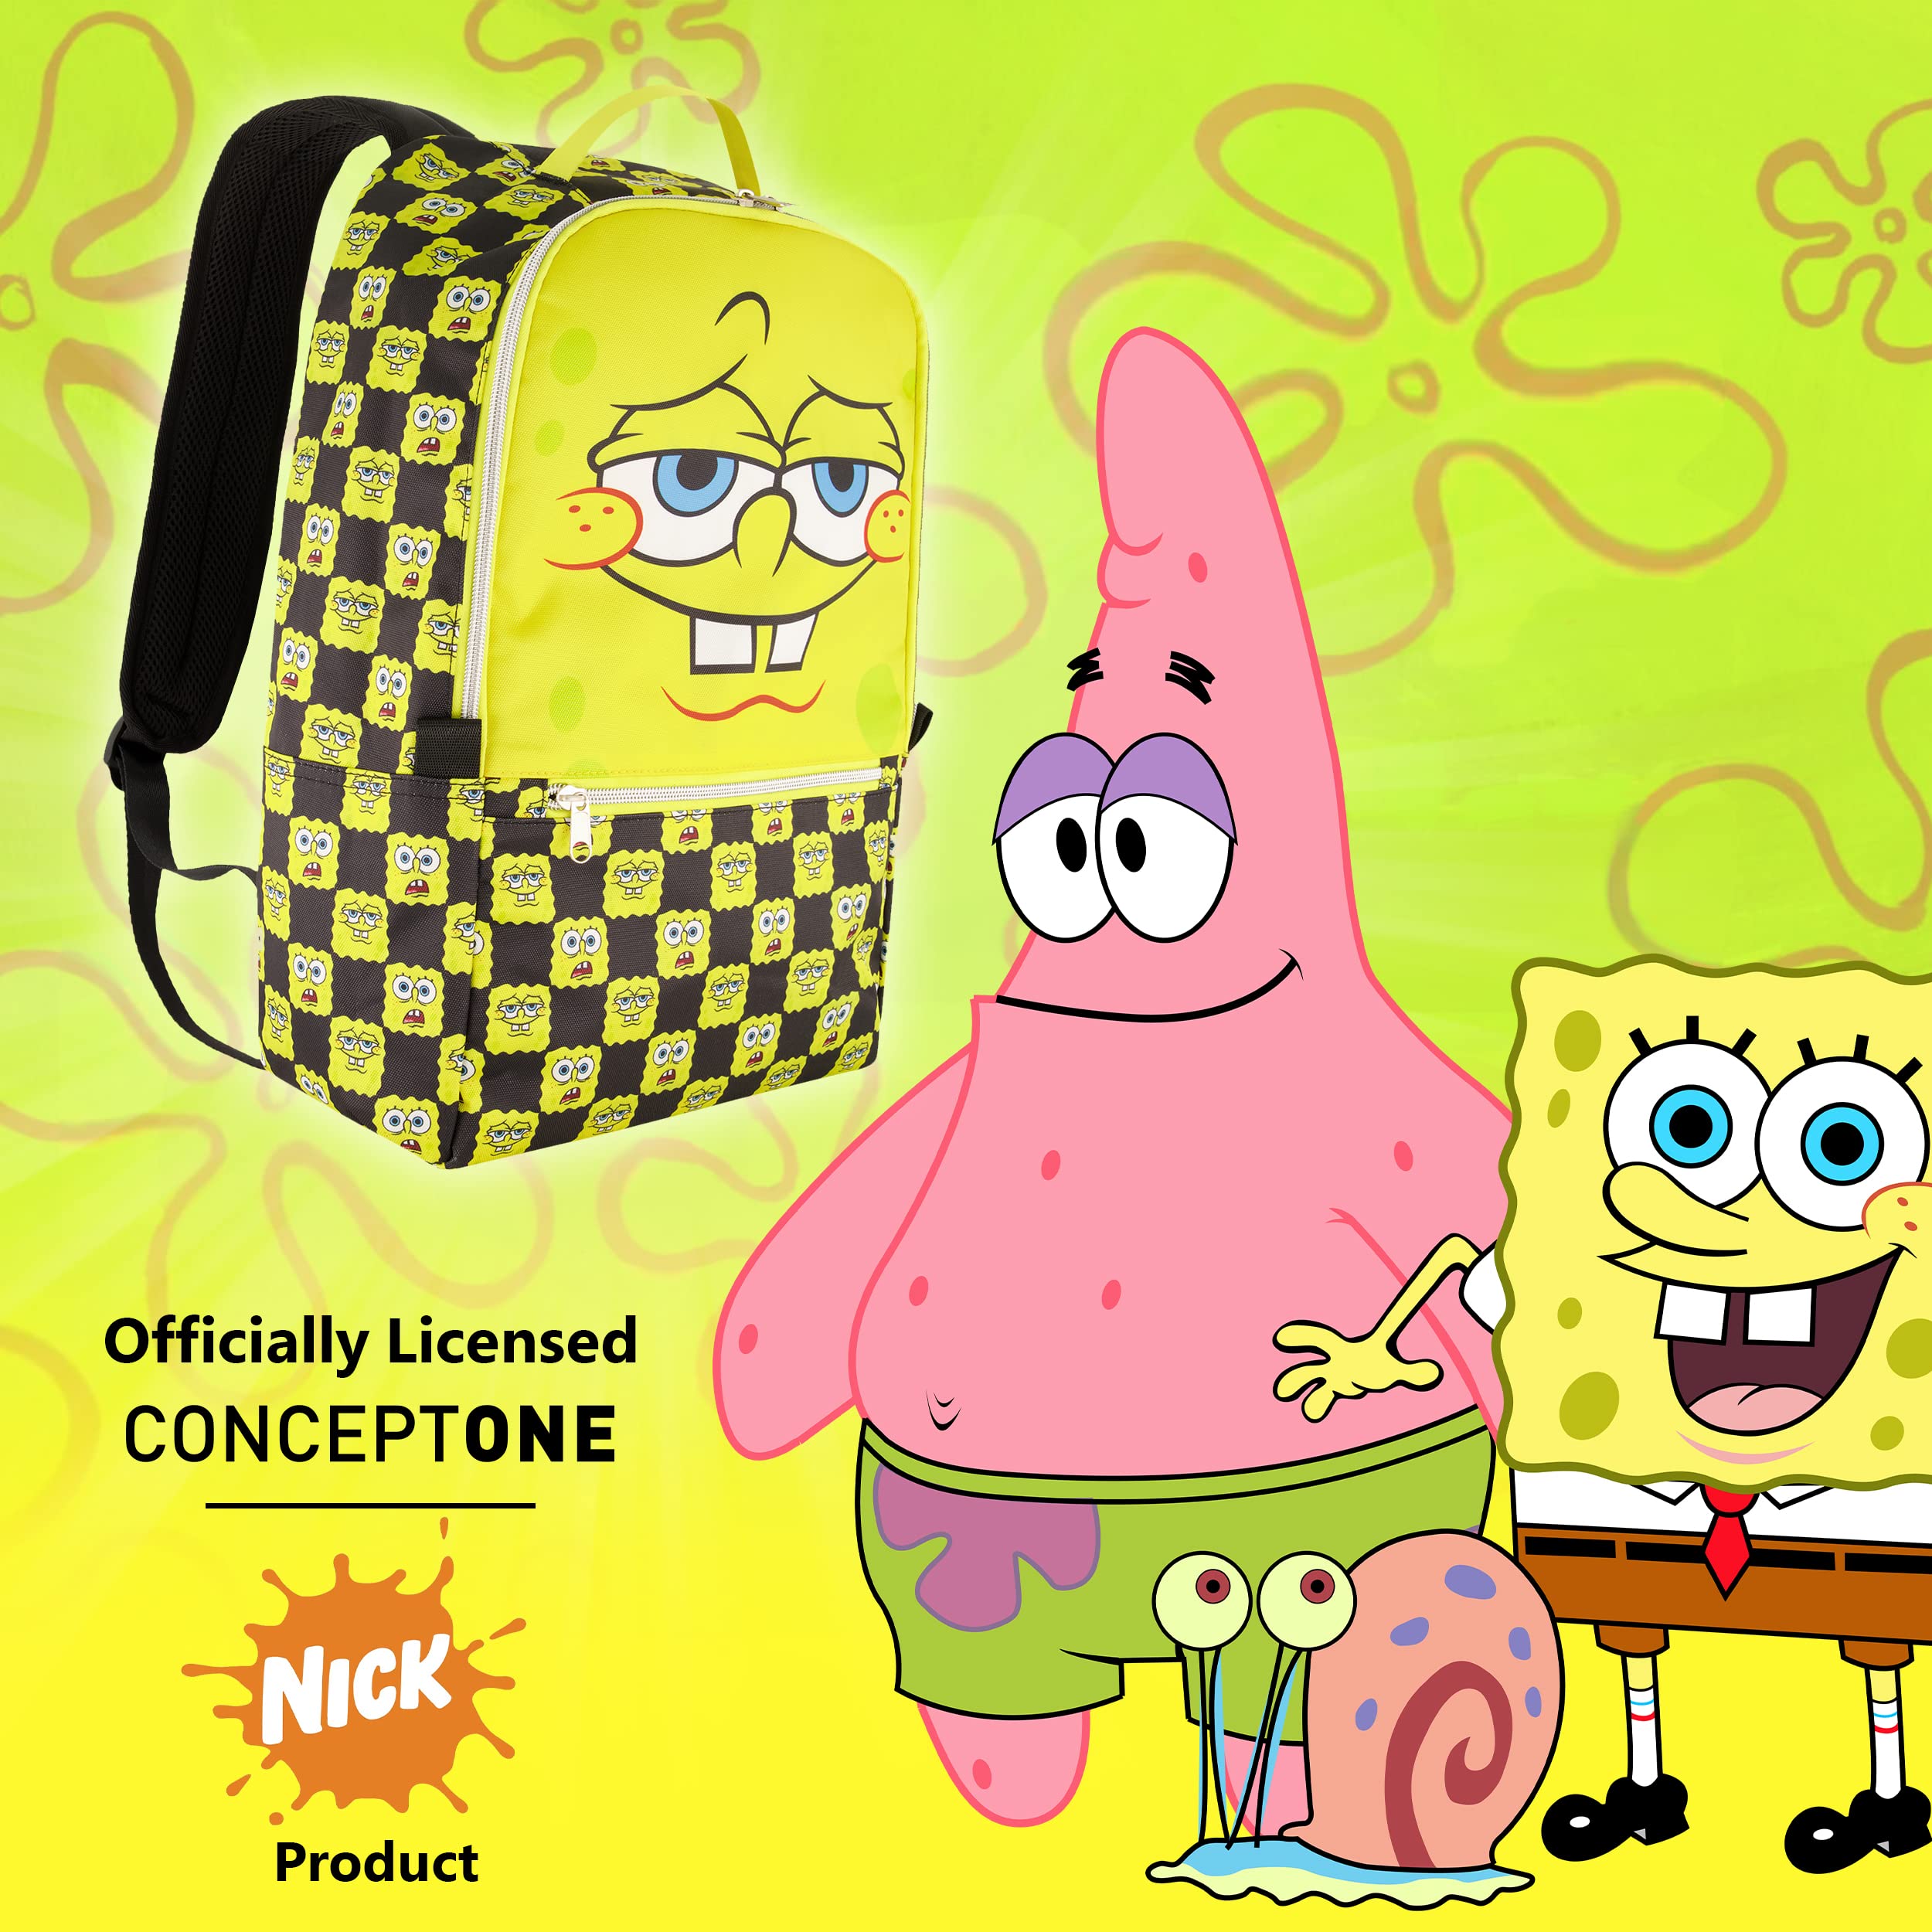 SpongeBob SquarePants 13 Inch Sleeve Laptop Backpack, Checkered Padded Computer Bag for Commute or Travel, Multi